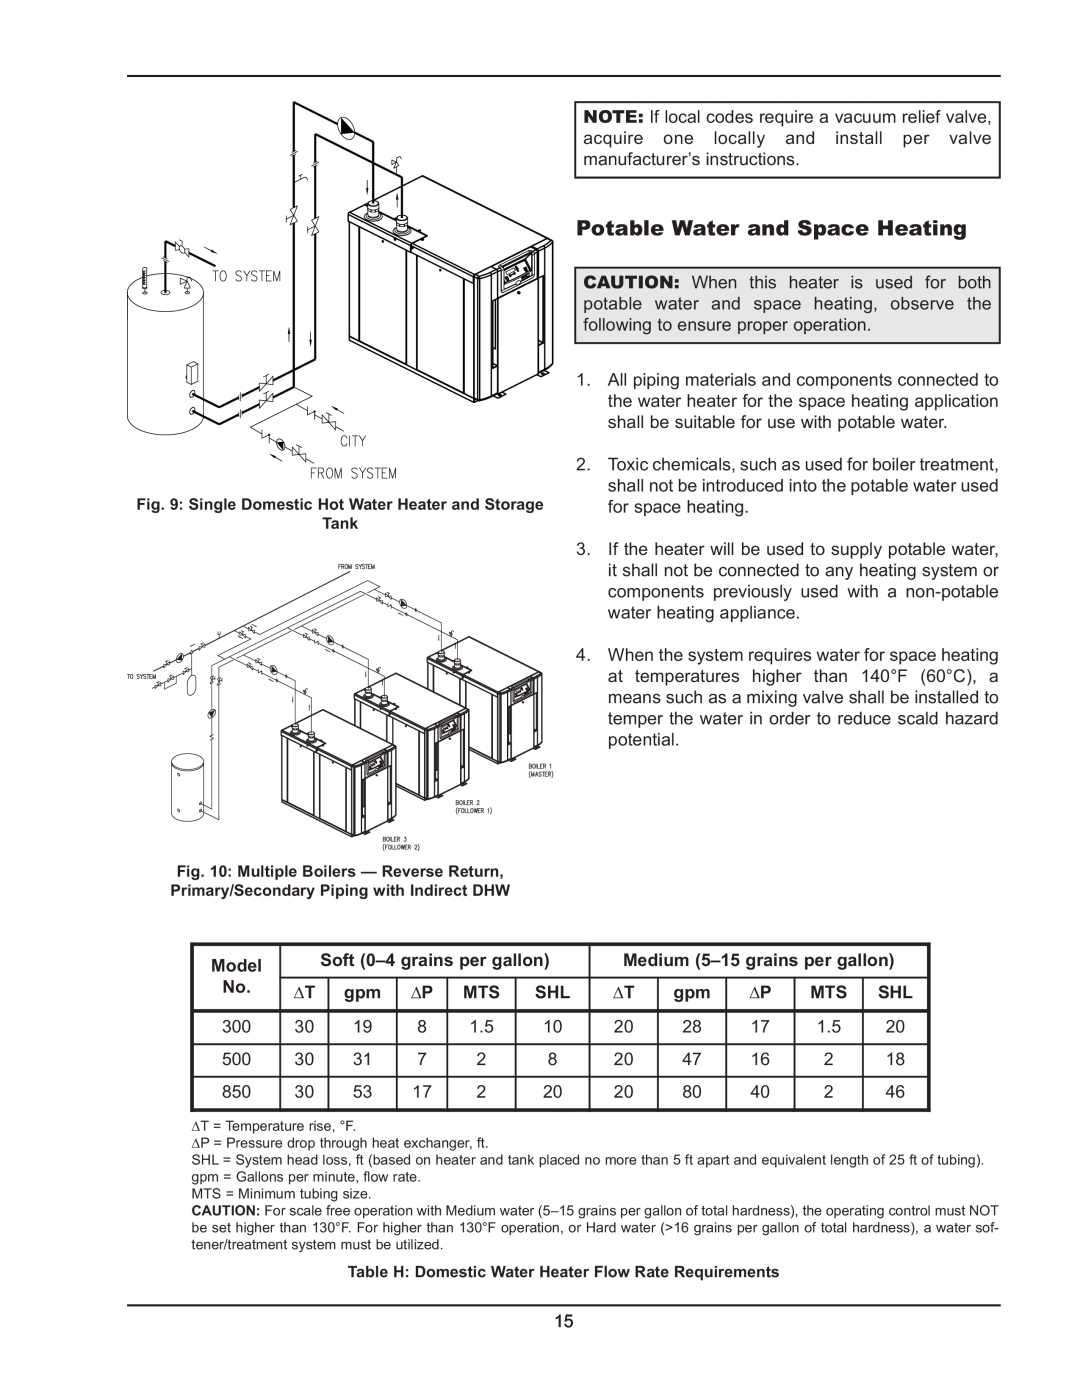 Raypak 300, 850 operating instructions Potable Water and Space Heating 